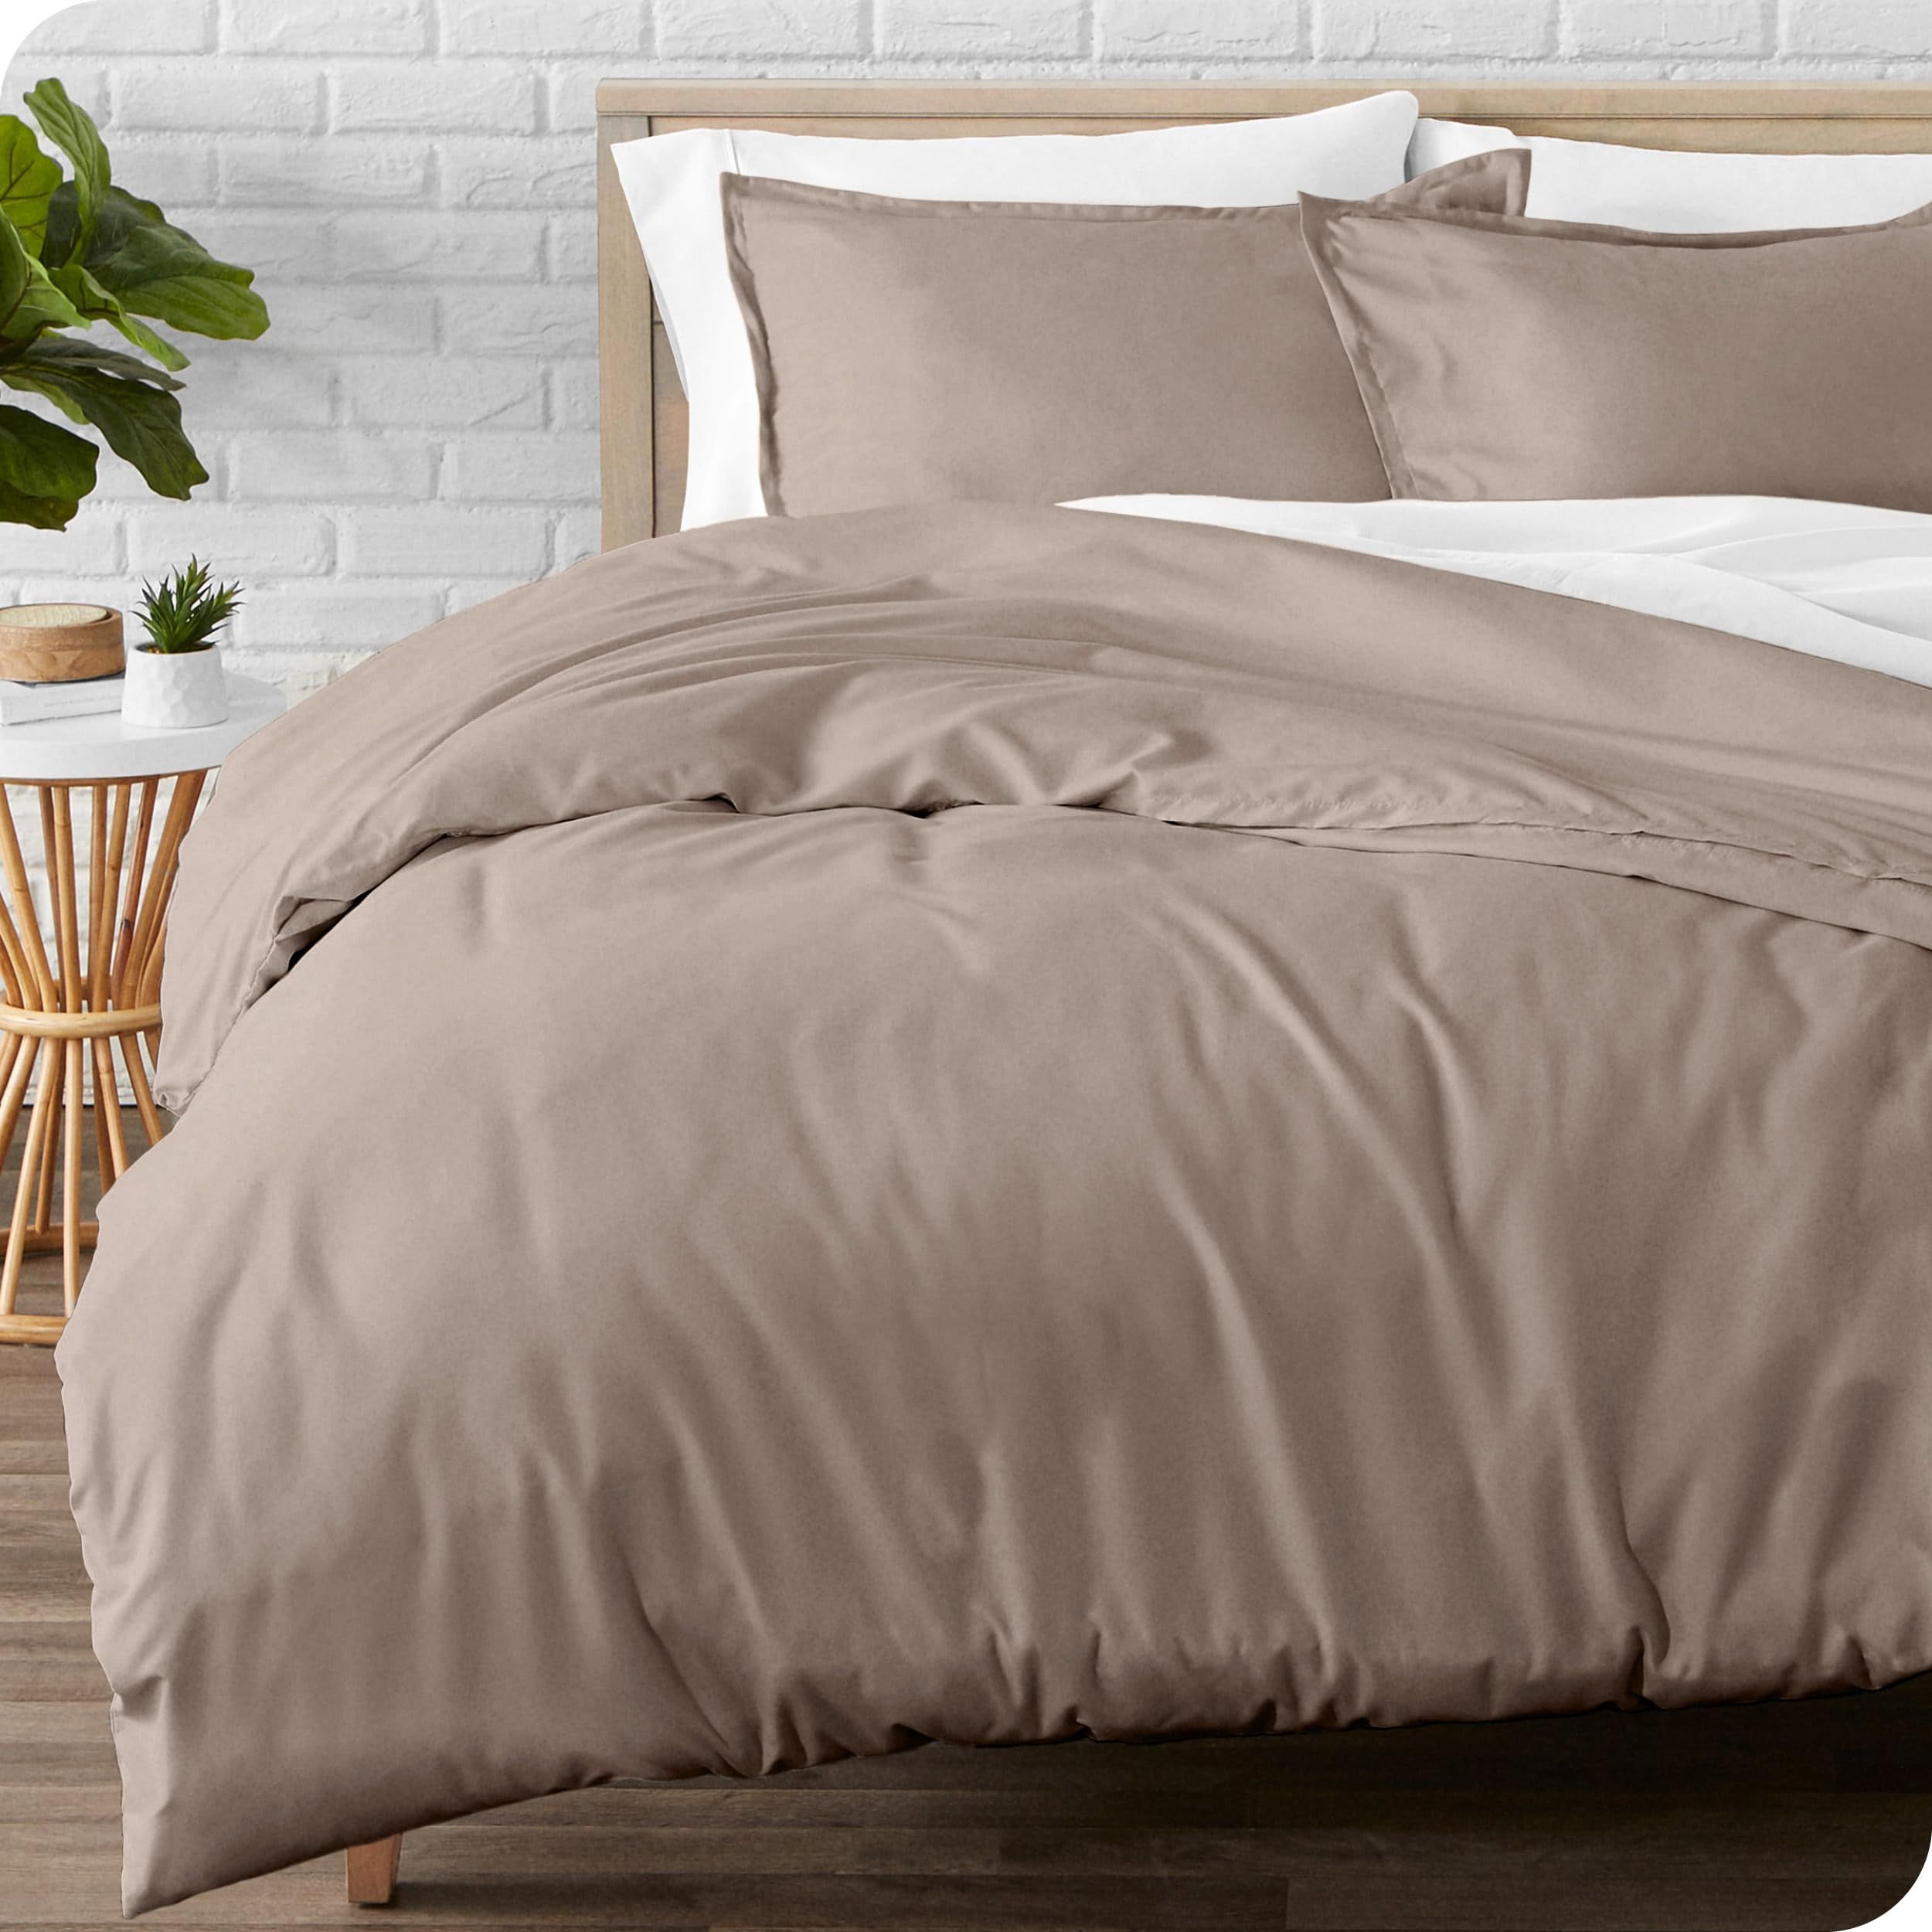 Flannel Duvet Cover Why Flannel Bedding Is The Ultimate Cozy Upgrade